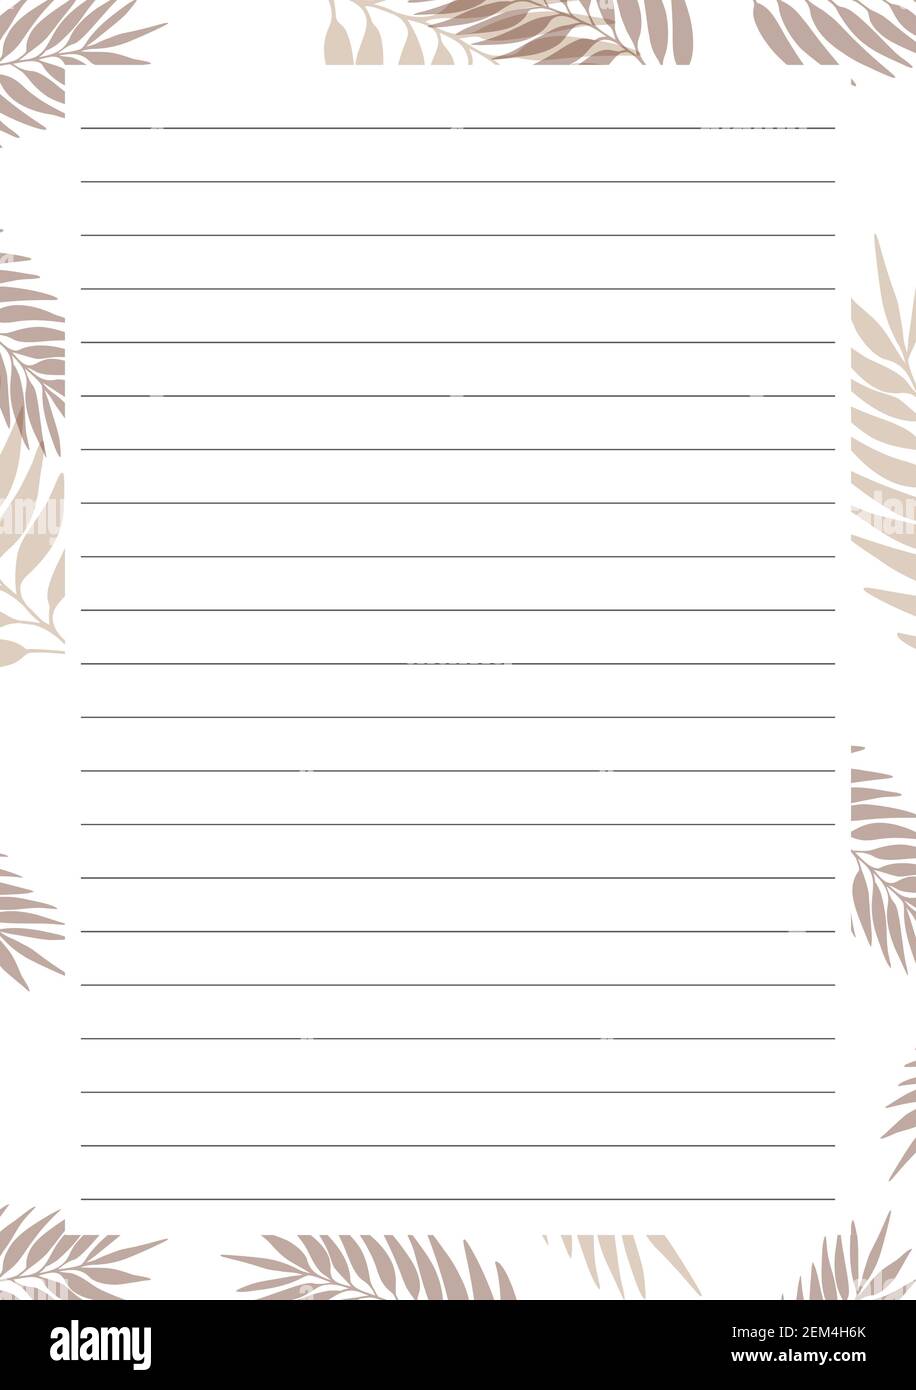 Abstract Striped Grid Paper With Floral Note Design Empty Chart Photo  Background And Picture For Free Download - Pngtree